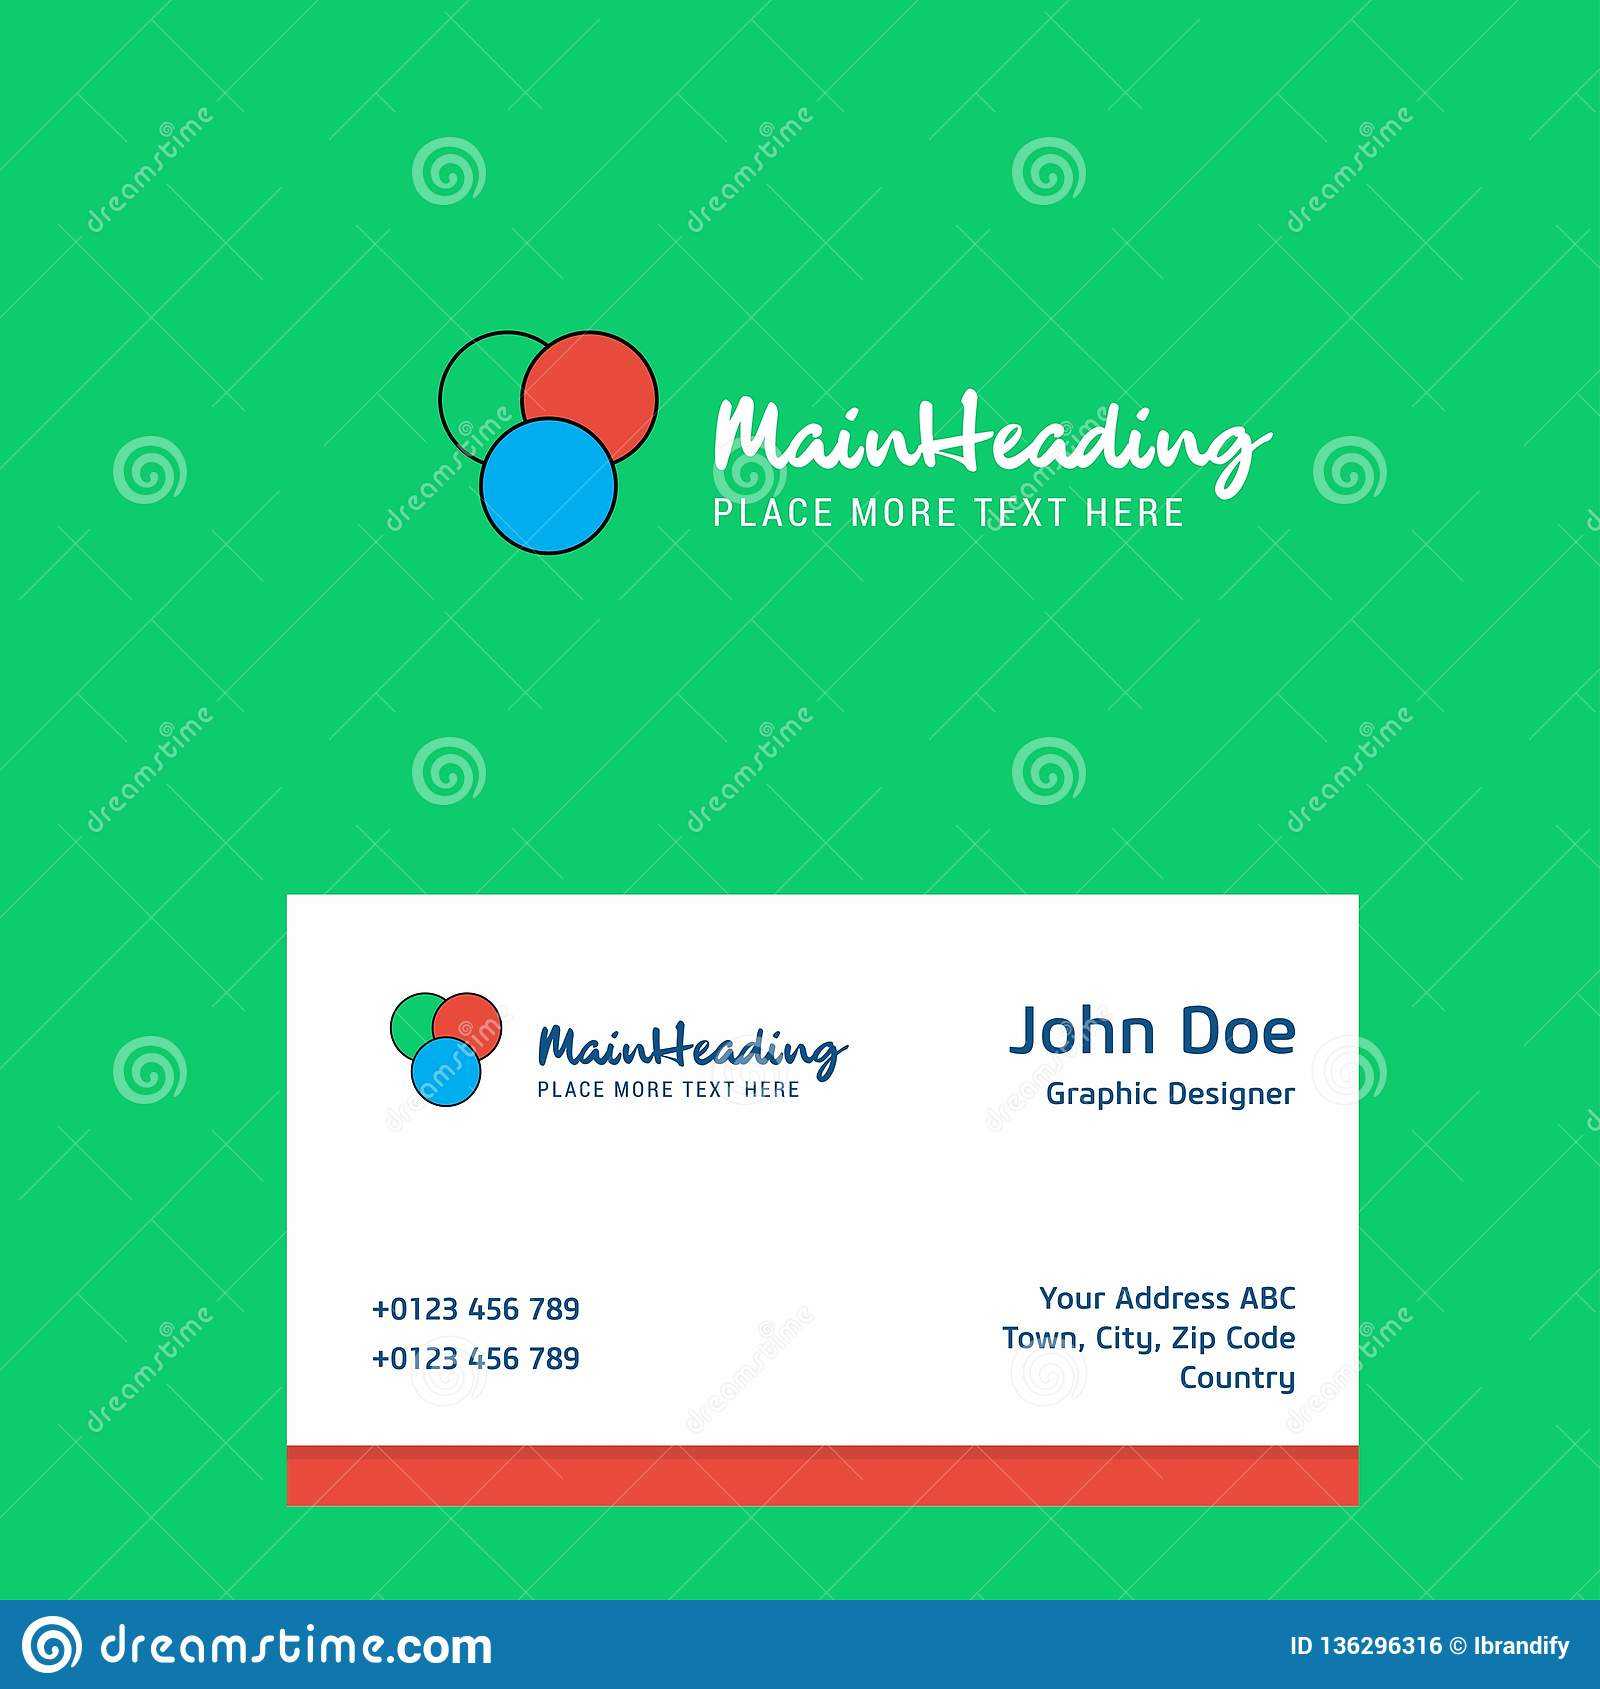 Circles Logo Design With Business Card Template. Elegant In Media Id Card Templates